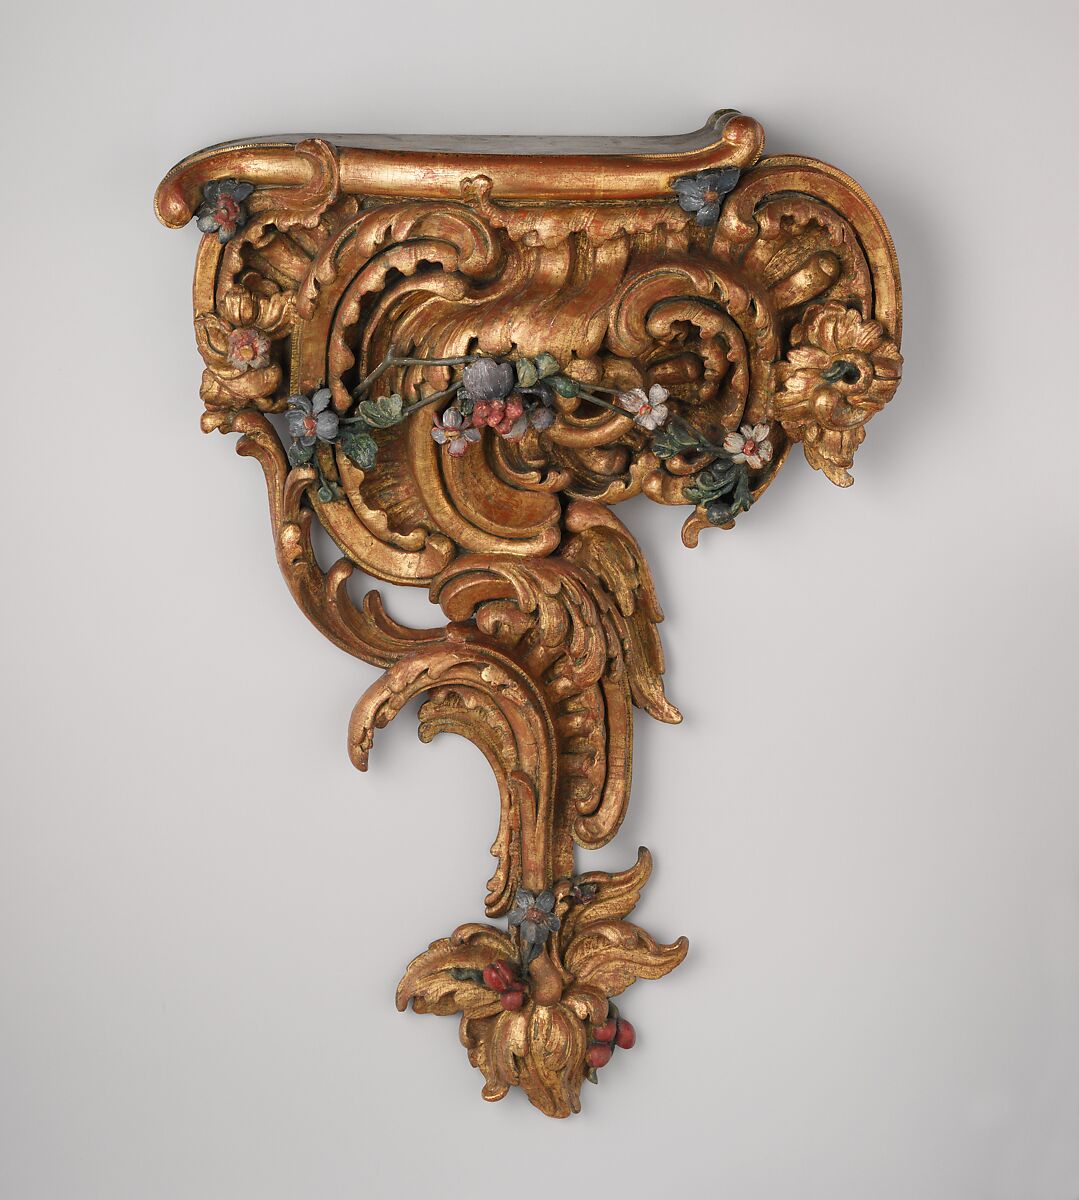 Pair of wall brackets, Carved, painted and gilded basswood, German, Würzburg